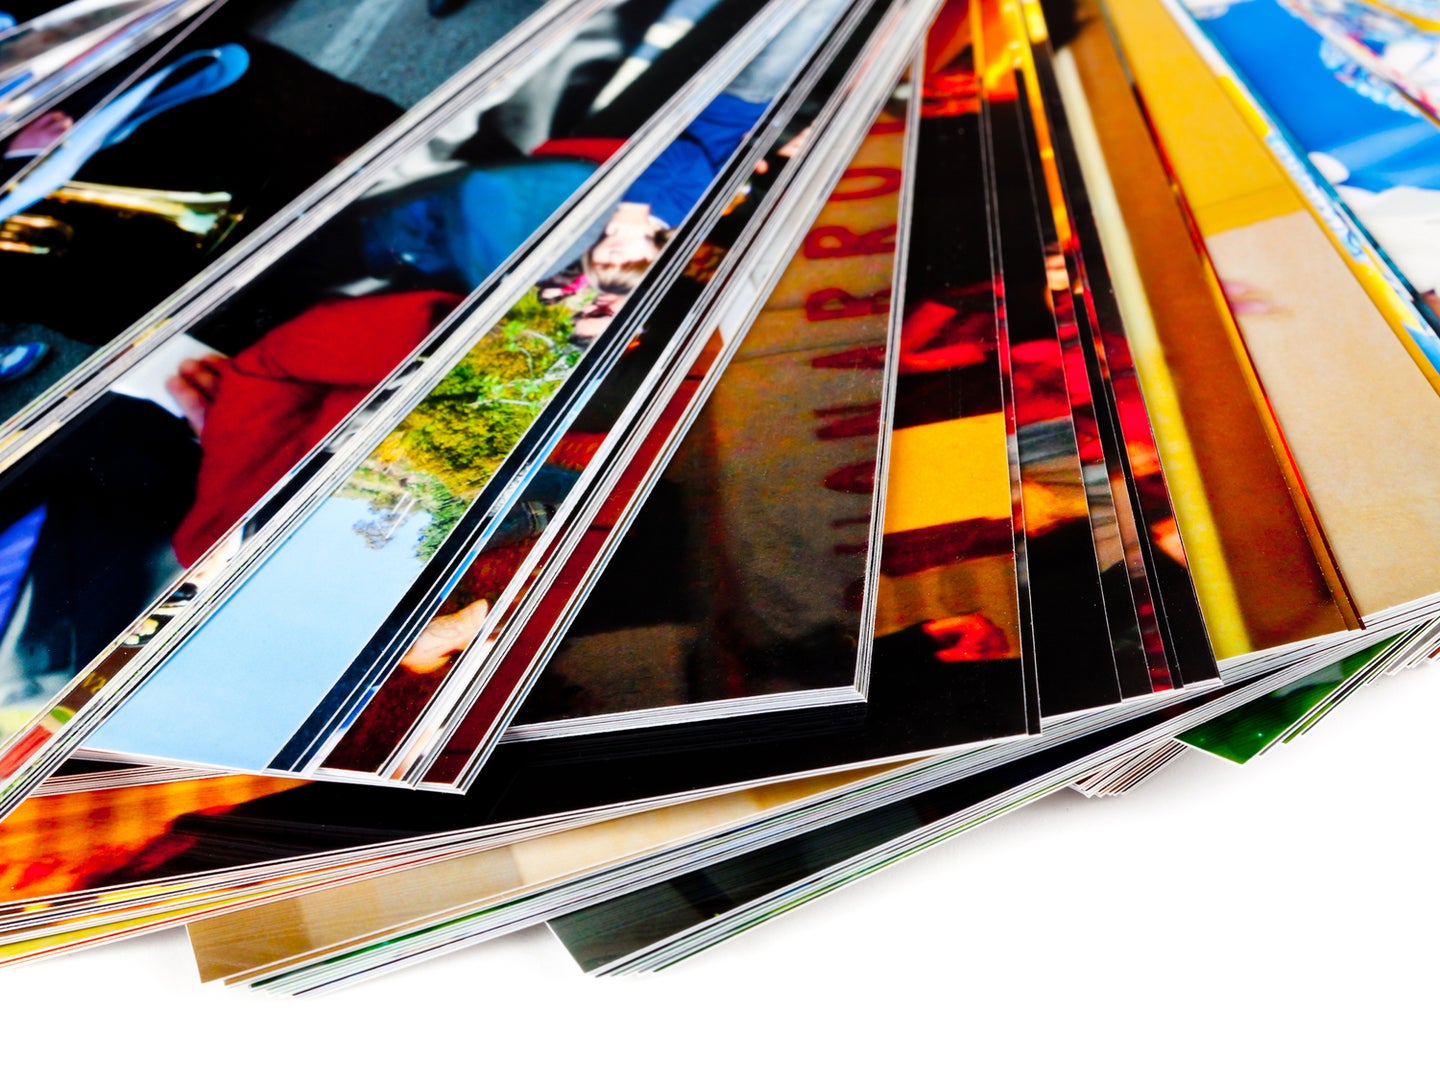 A fanned-out stack of printed photos on a white surface.